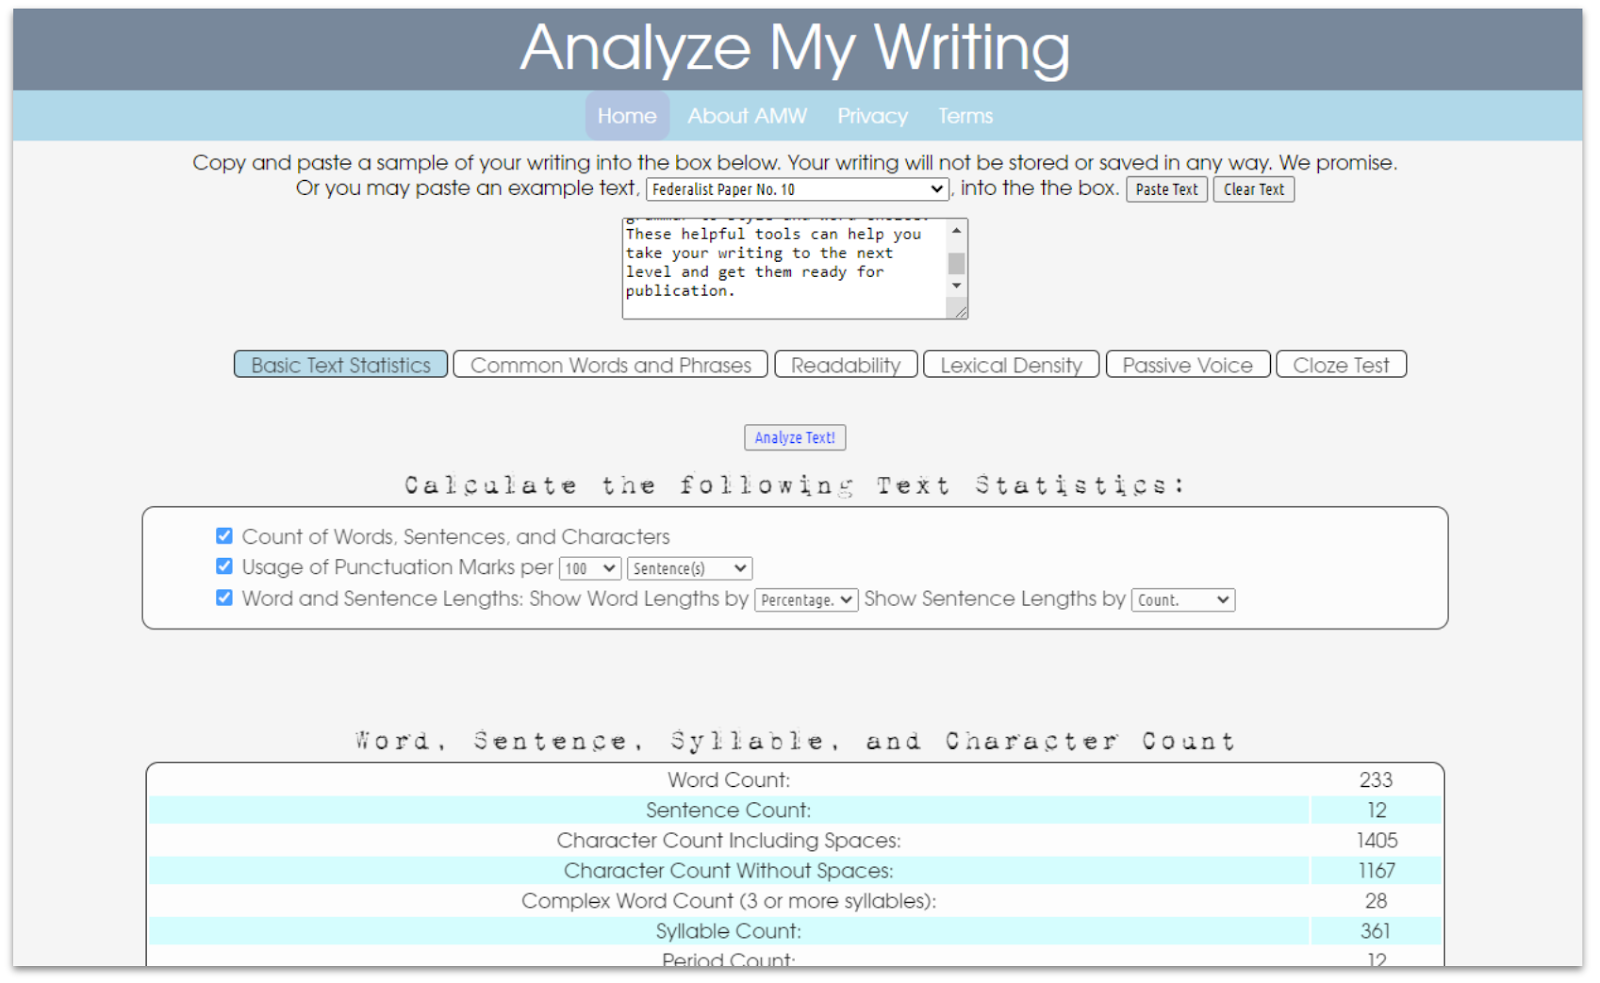 Example of using Analyze My Writing website to provide statistics about readability, lexical density, sentence length, and more